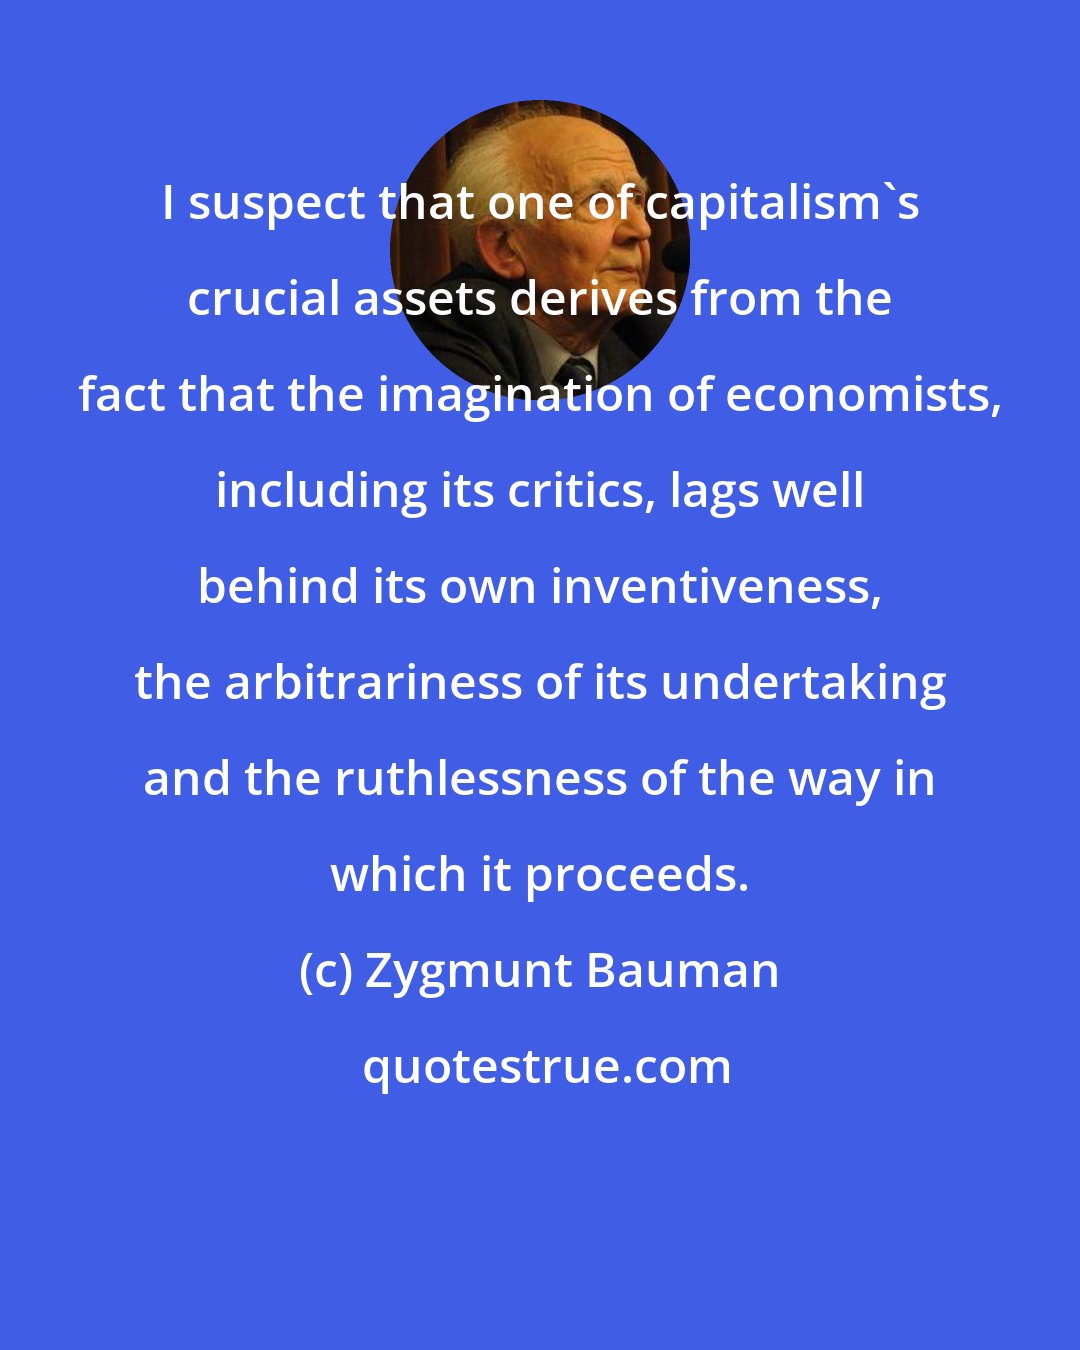 Zygmunt Bauman: I suspect that one of capitalism's crucial assets derives from the fact that the imagination of economists, including its critics, lags well behind its own inventiveness, the arbitrariness of its undertaking and the ruthlessness of the way in which it proceeds.